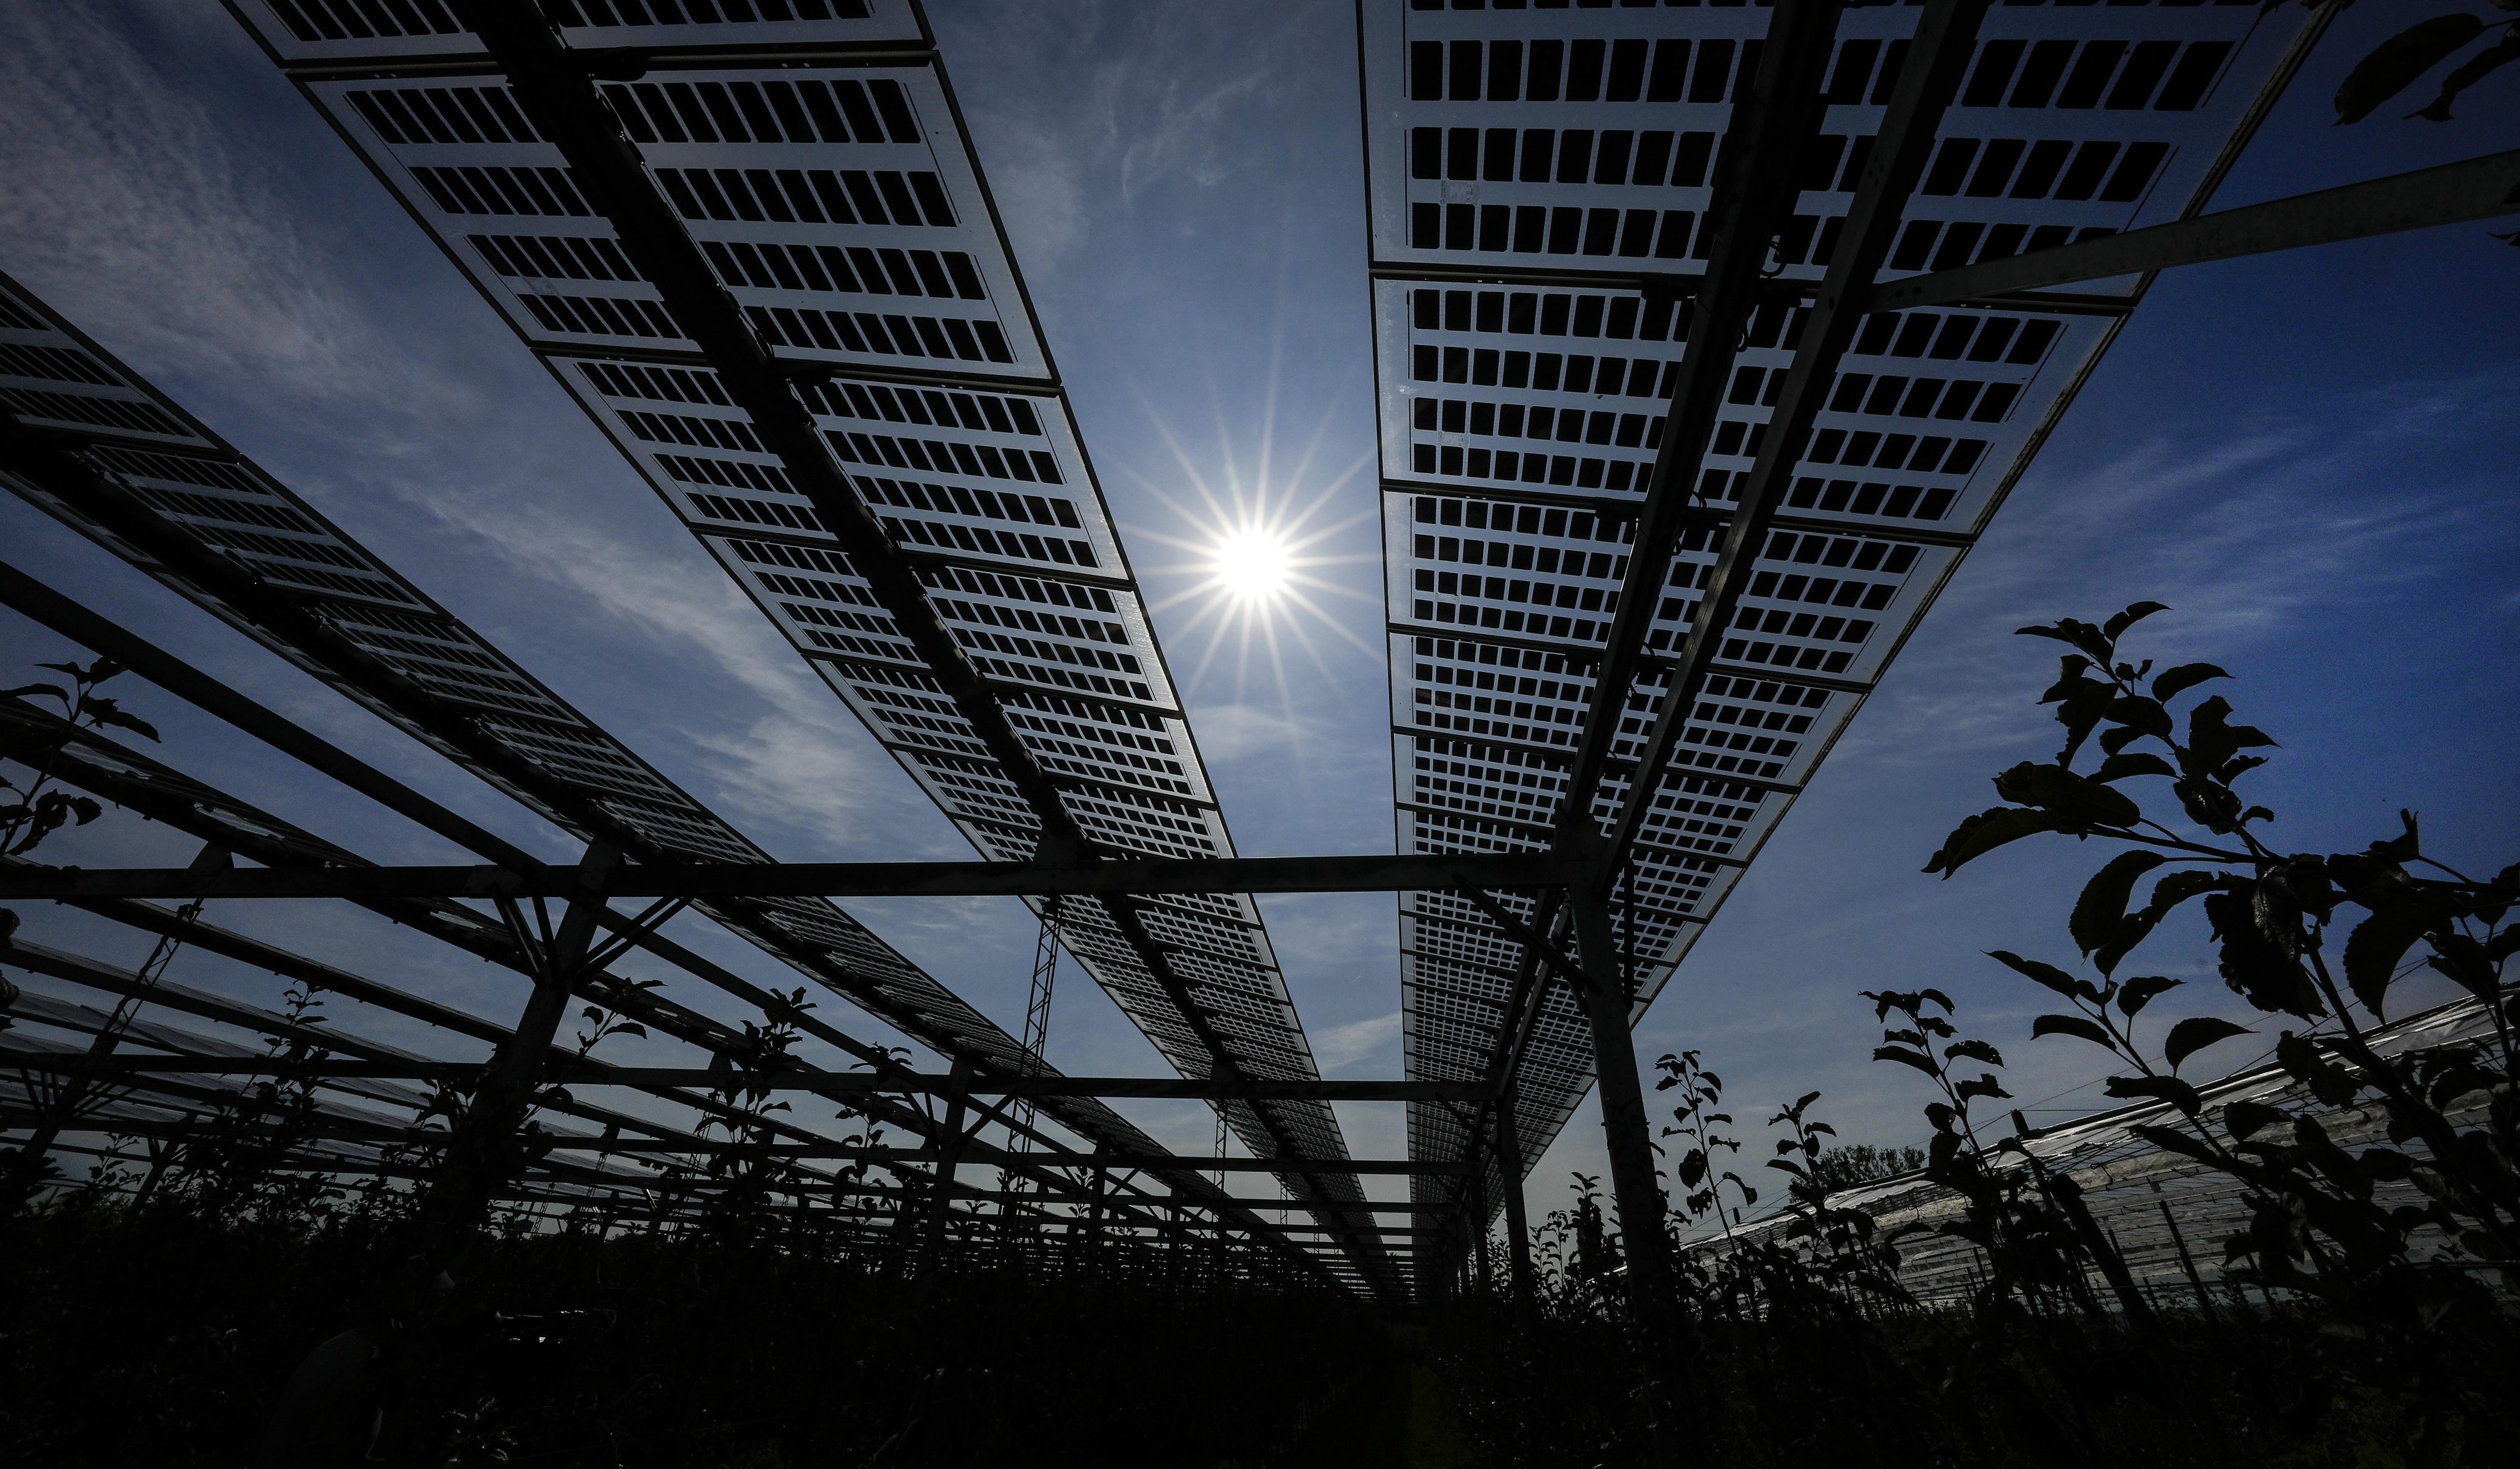 Solar panels are seen above an apple tree plantation in Gelsdorf, Germany. Long periods of sunshine took solar power generation in Europe to a record high this summer, helping reduce the need for gas imports at a time of sharply rising fossil fuel prices. Photo: AP